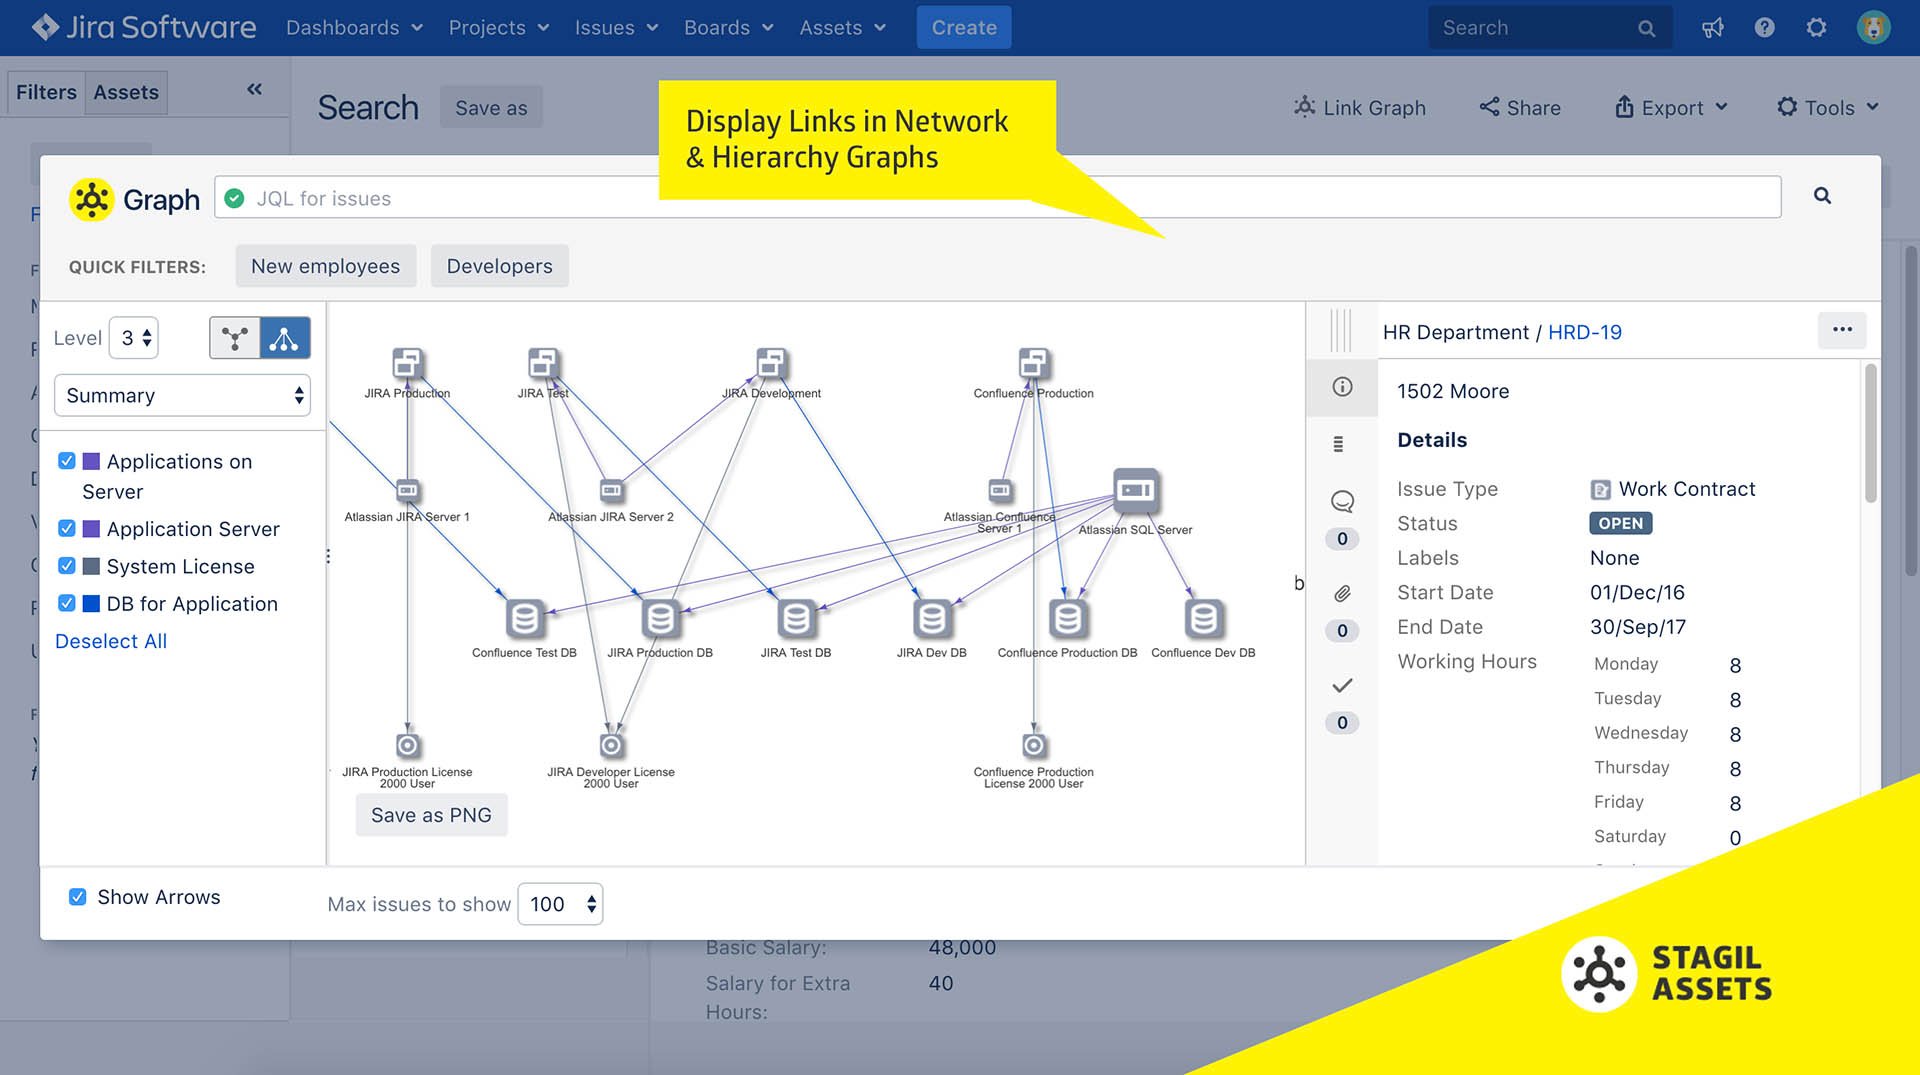 Display Links in Network & Hierarchy Graphs